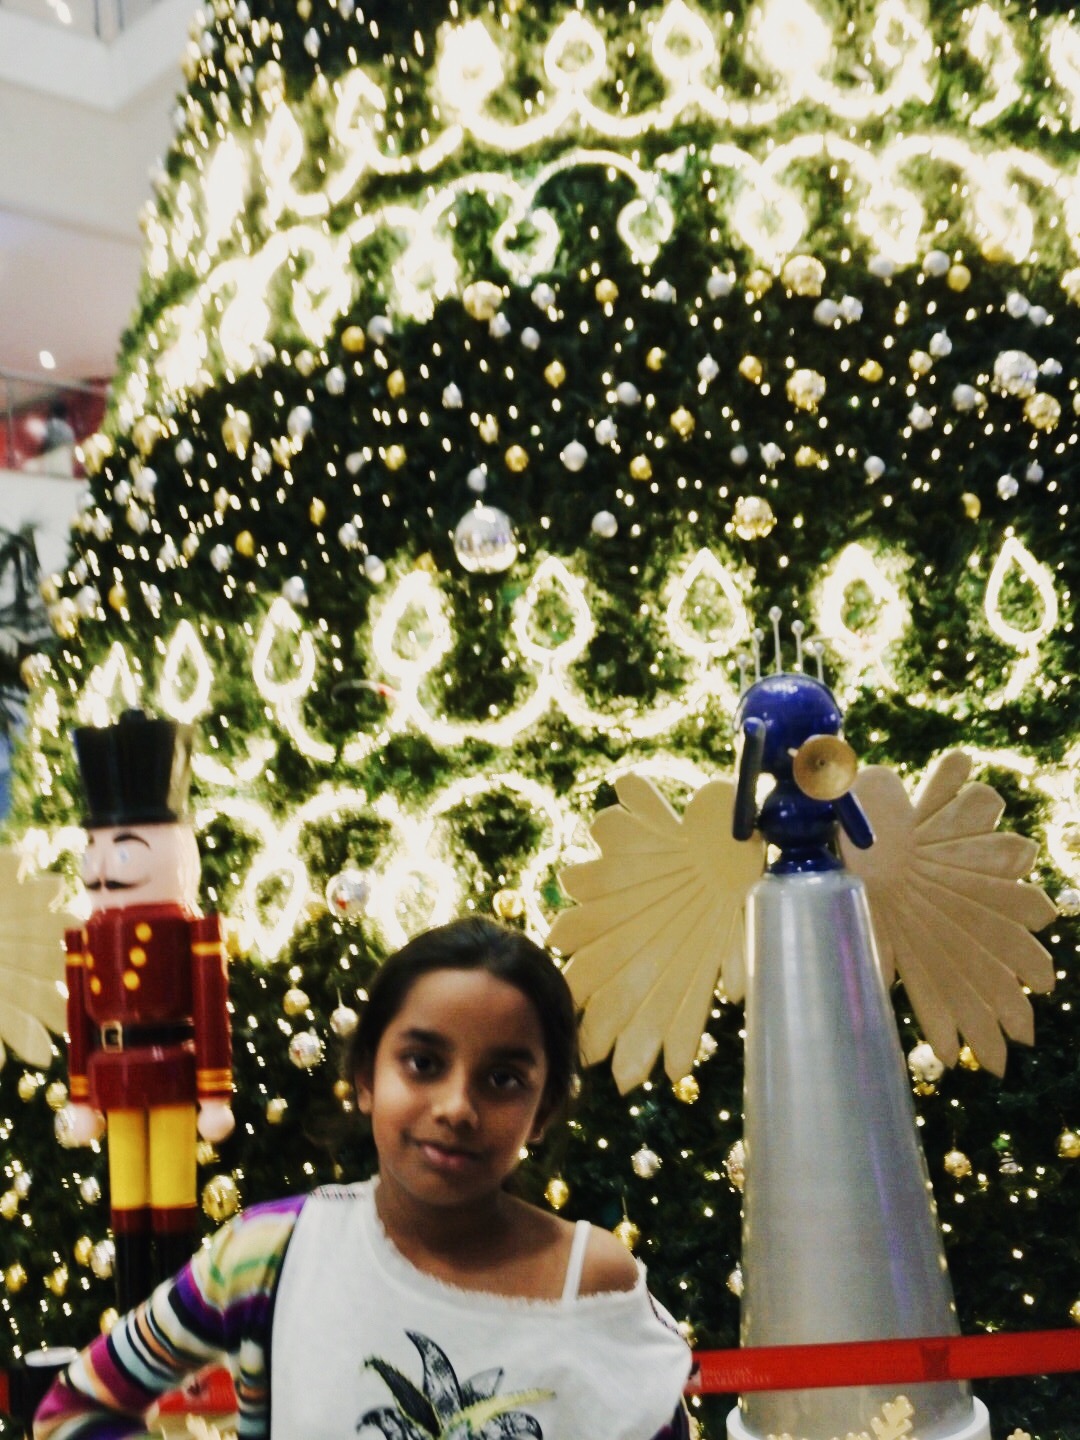 In front of the glorious Christmas tree